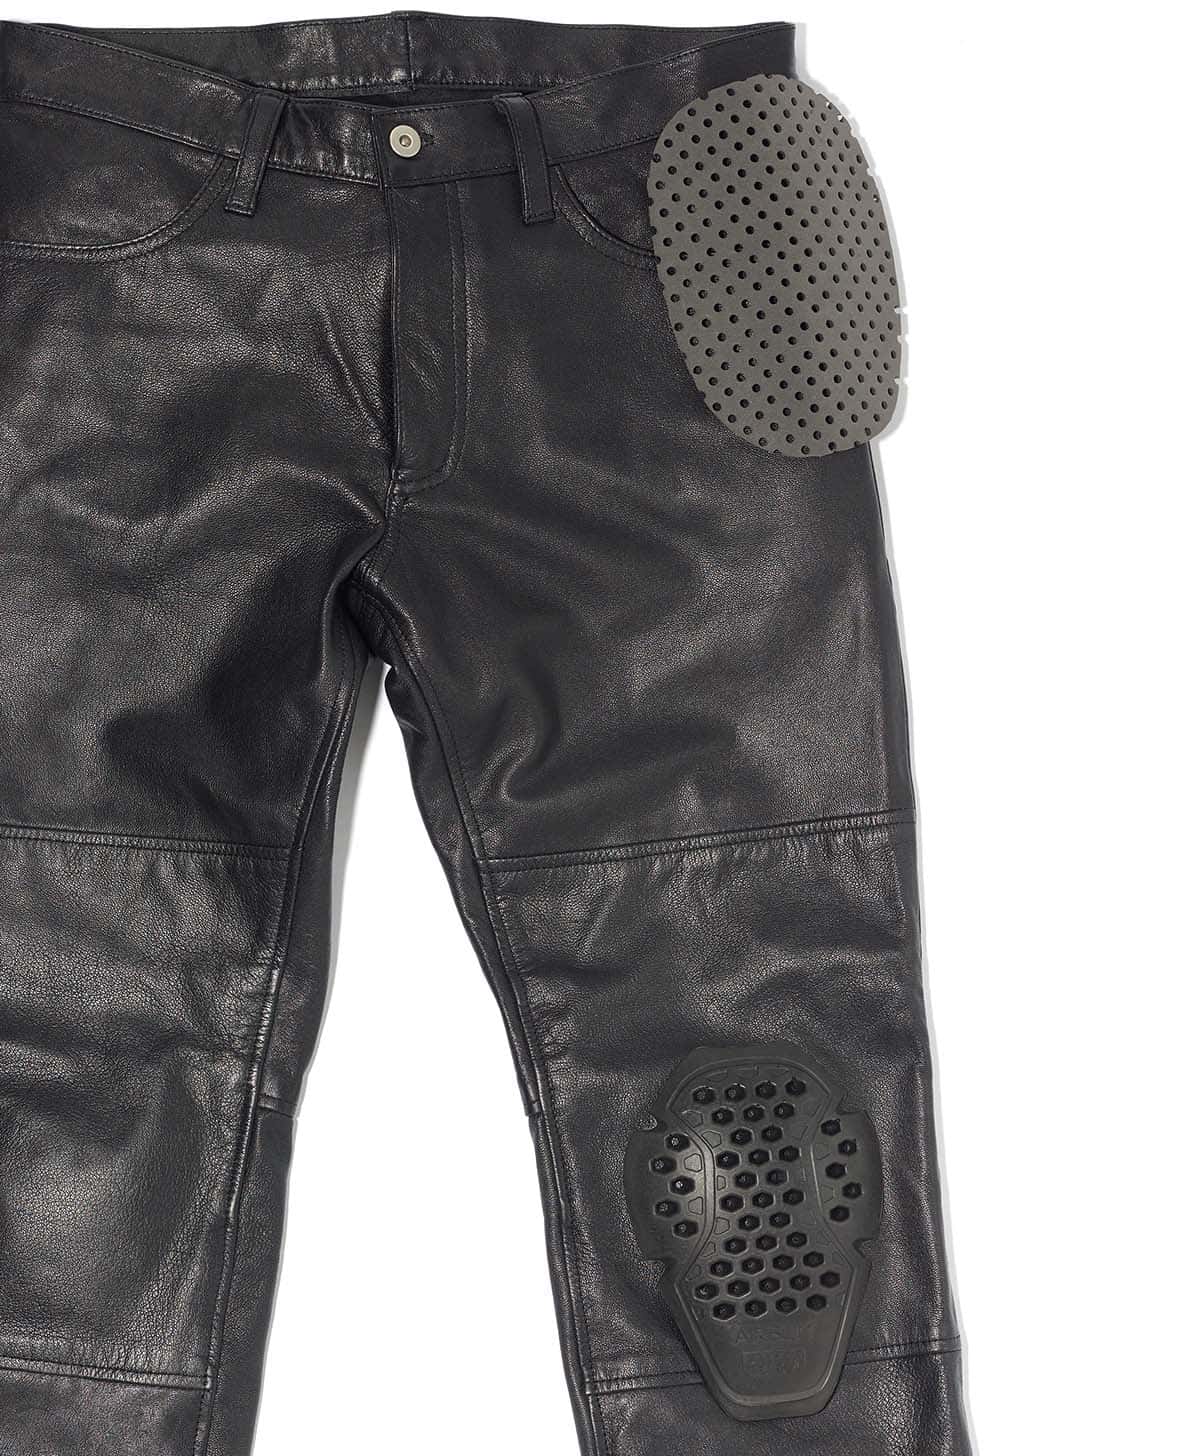 Kadoya K's Leather 00s Raw Cowhide Leather Flare Pants Available sizes  27-34, accommodate oversized Founded since 1935, Kadoya is a m